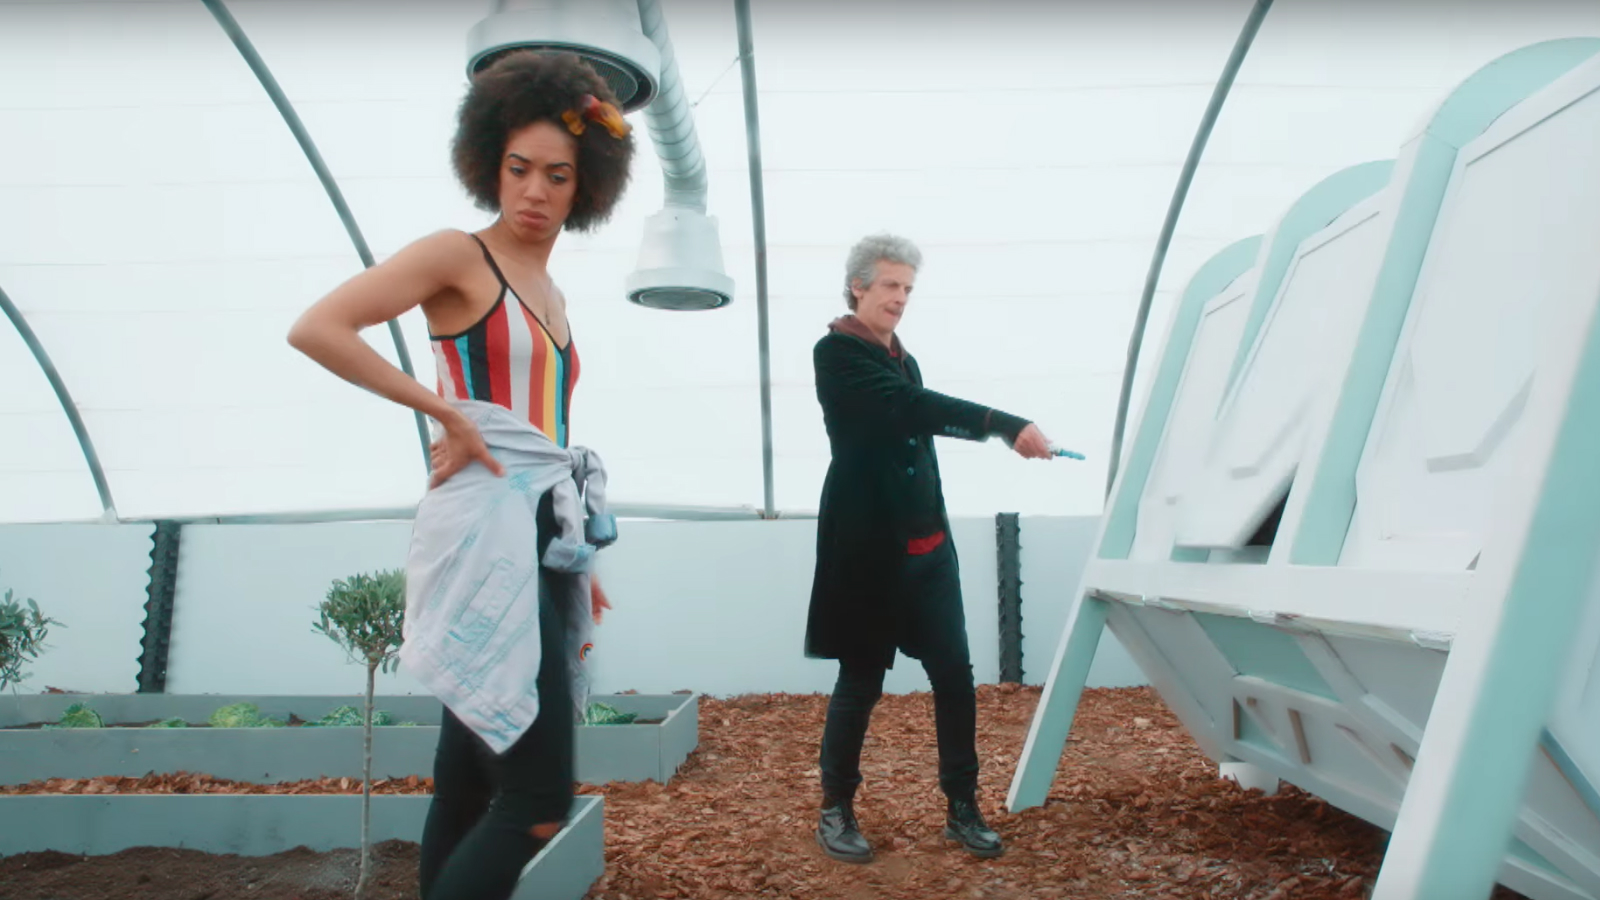 Doctor Who S1002 review A quirky idea that never reaches its full potential